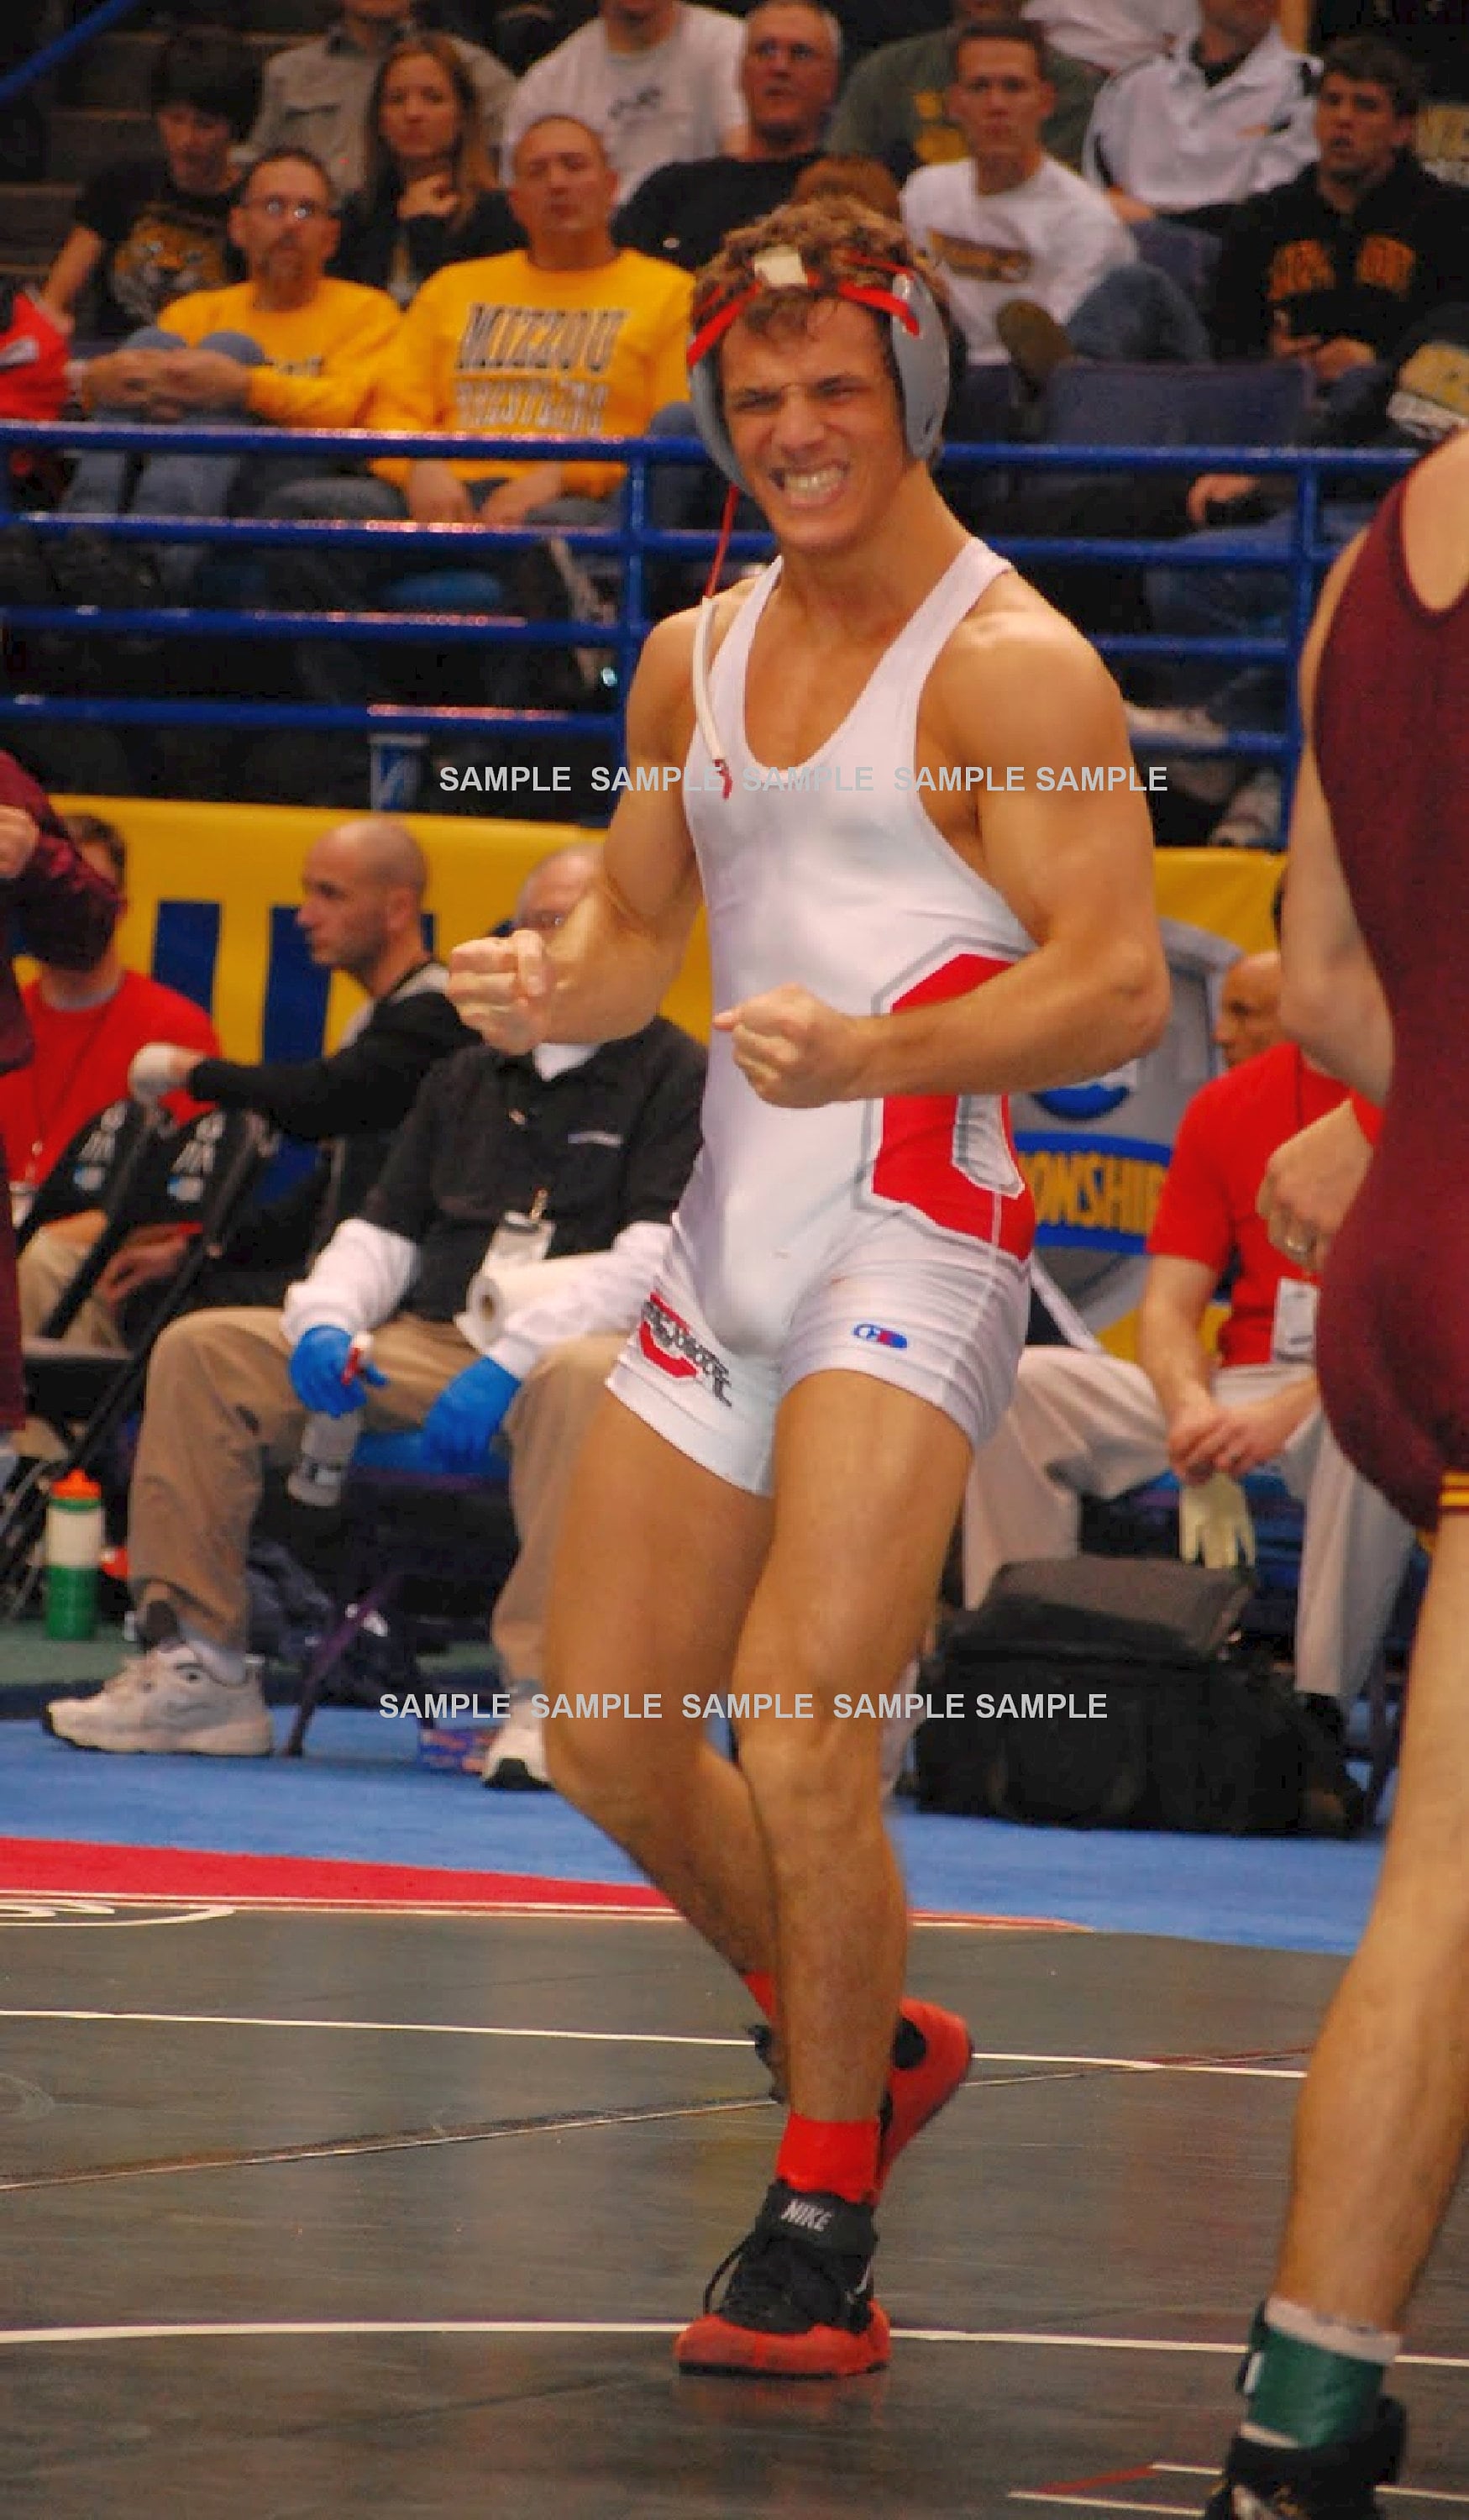 Wrestlers with bulge